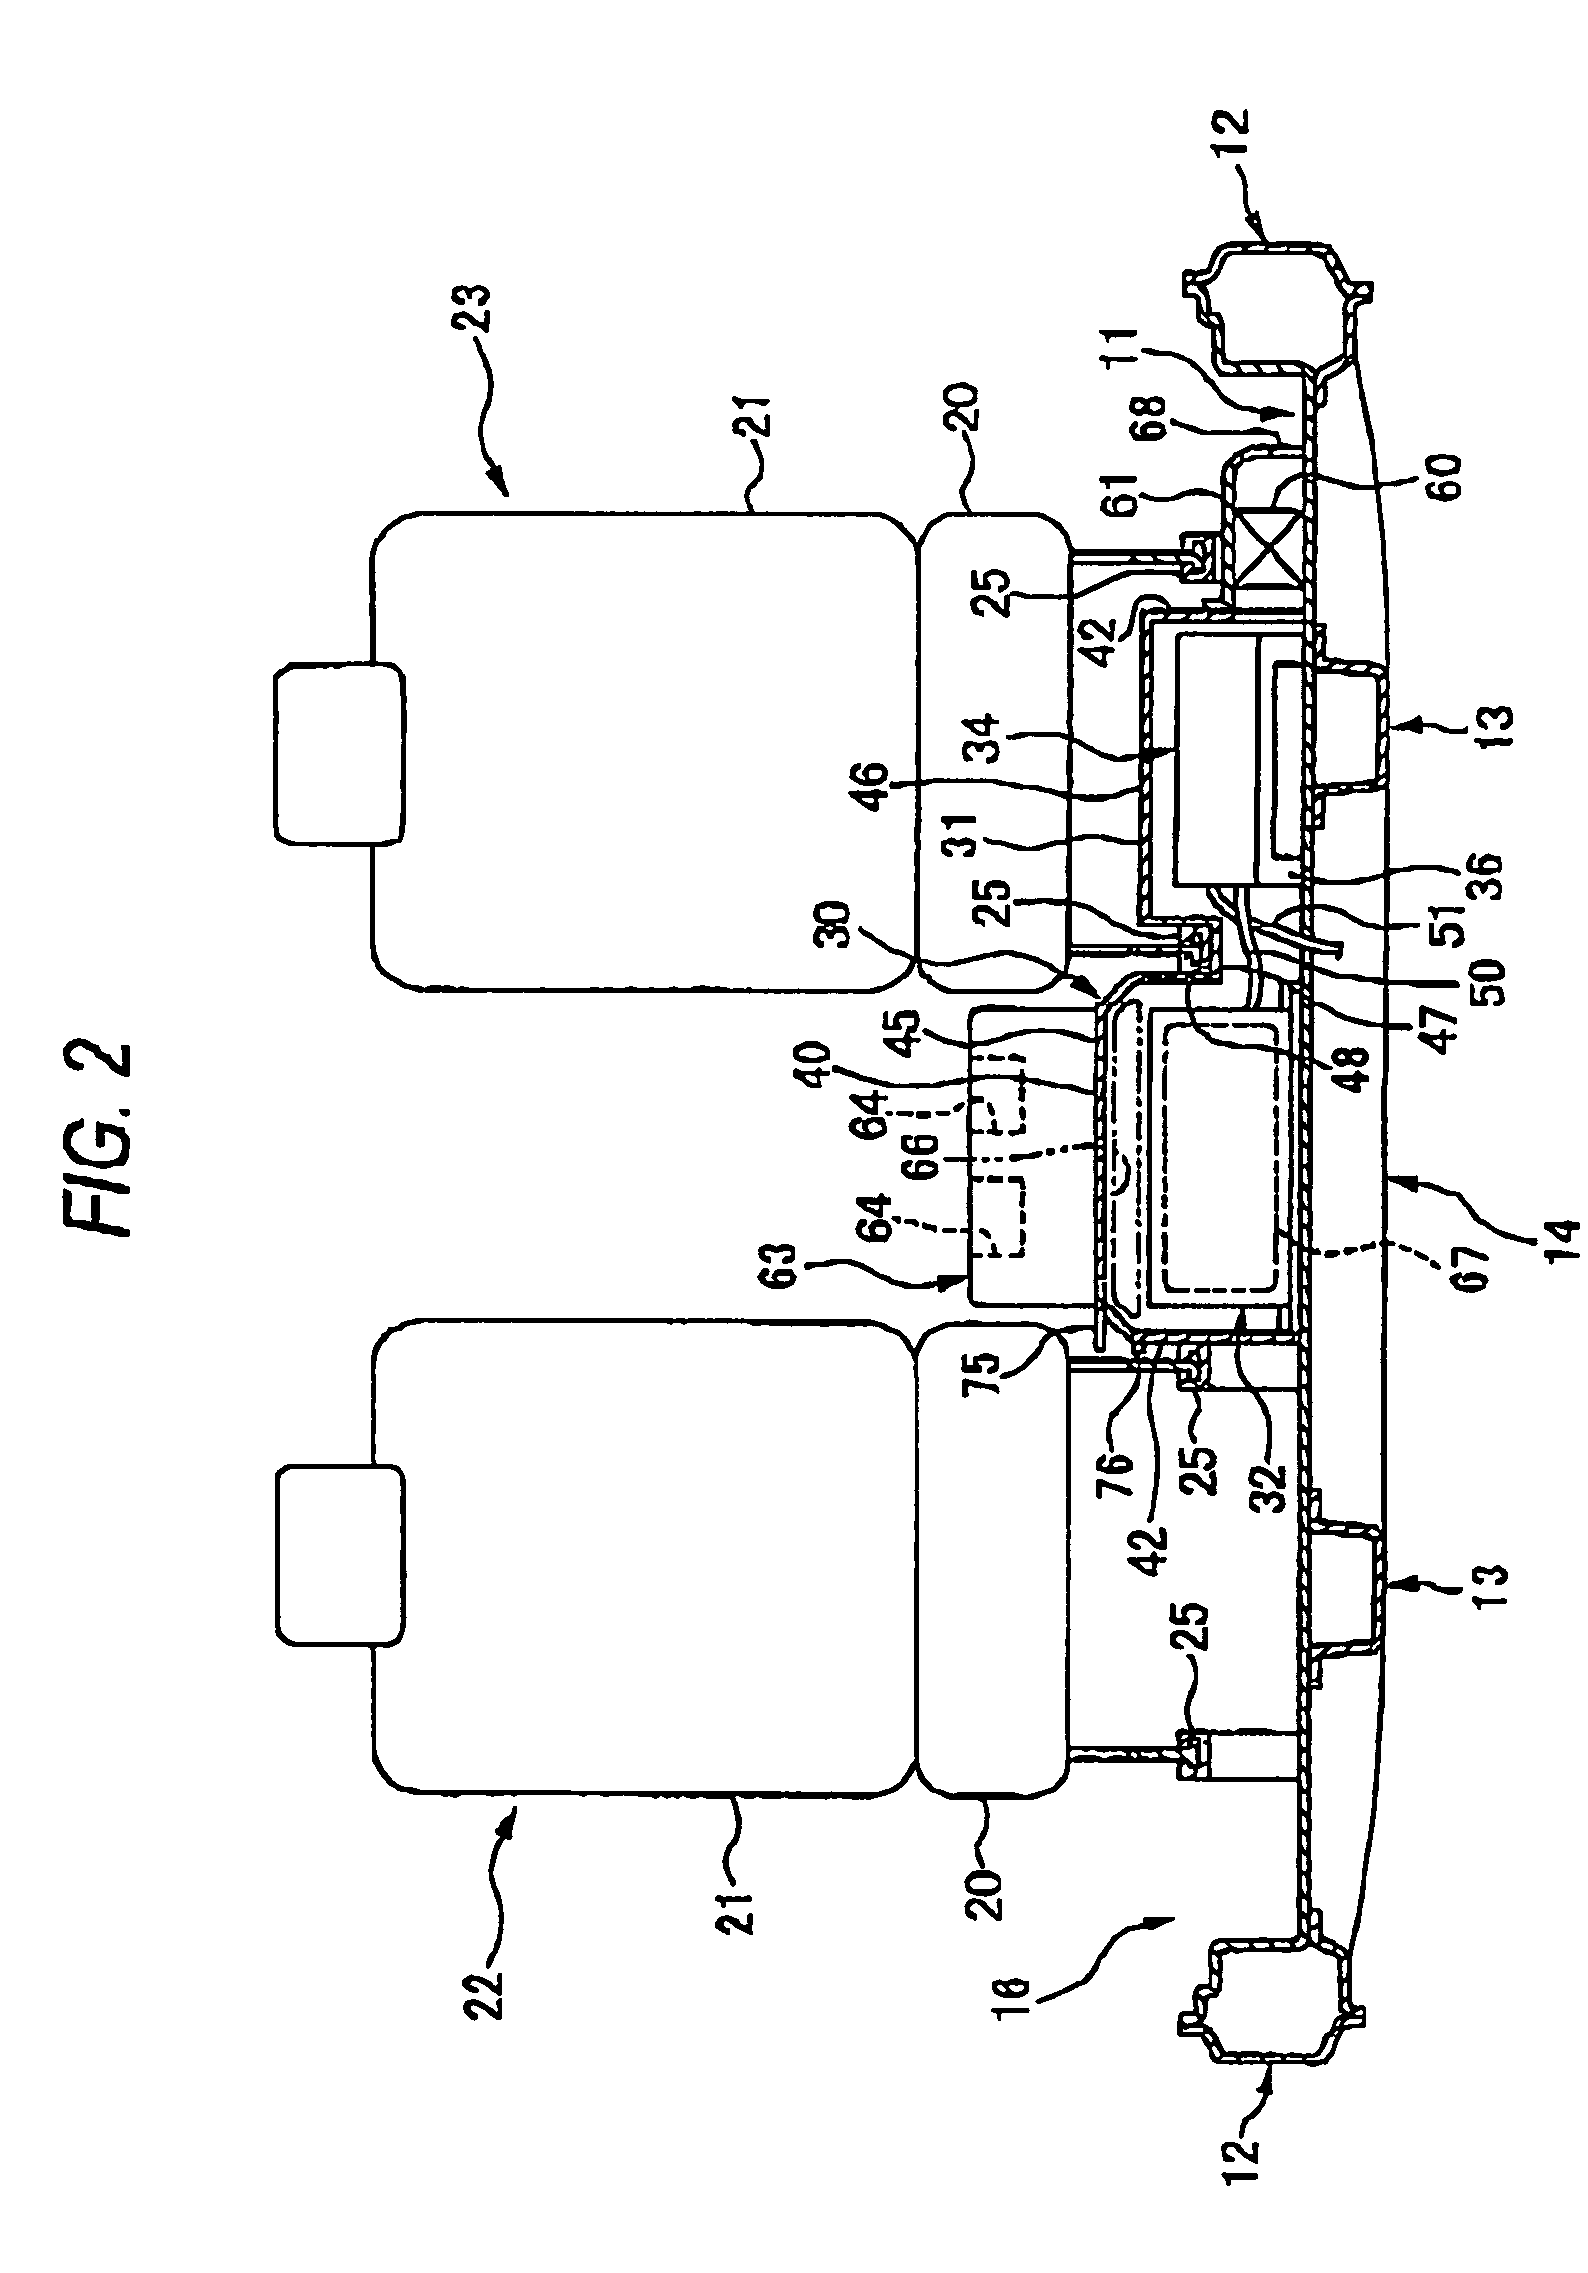 High-voltage electrical equipment case arranging structure